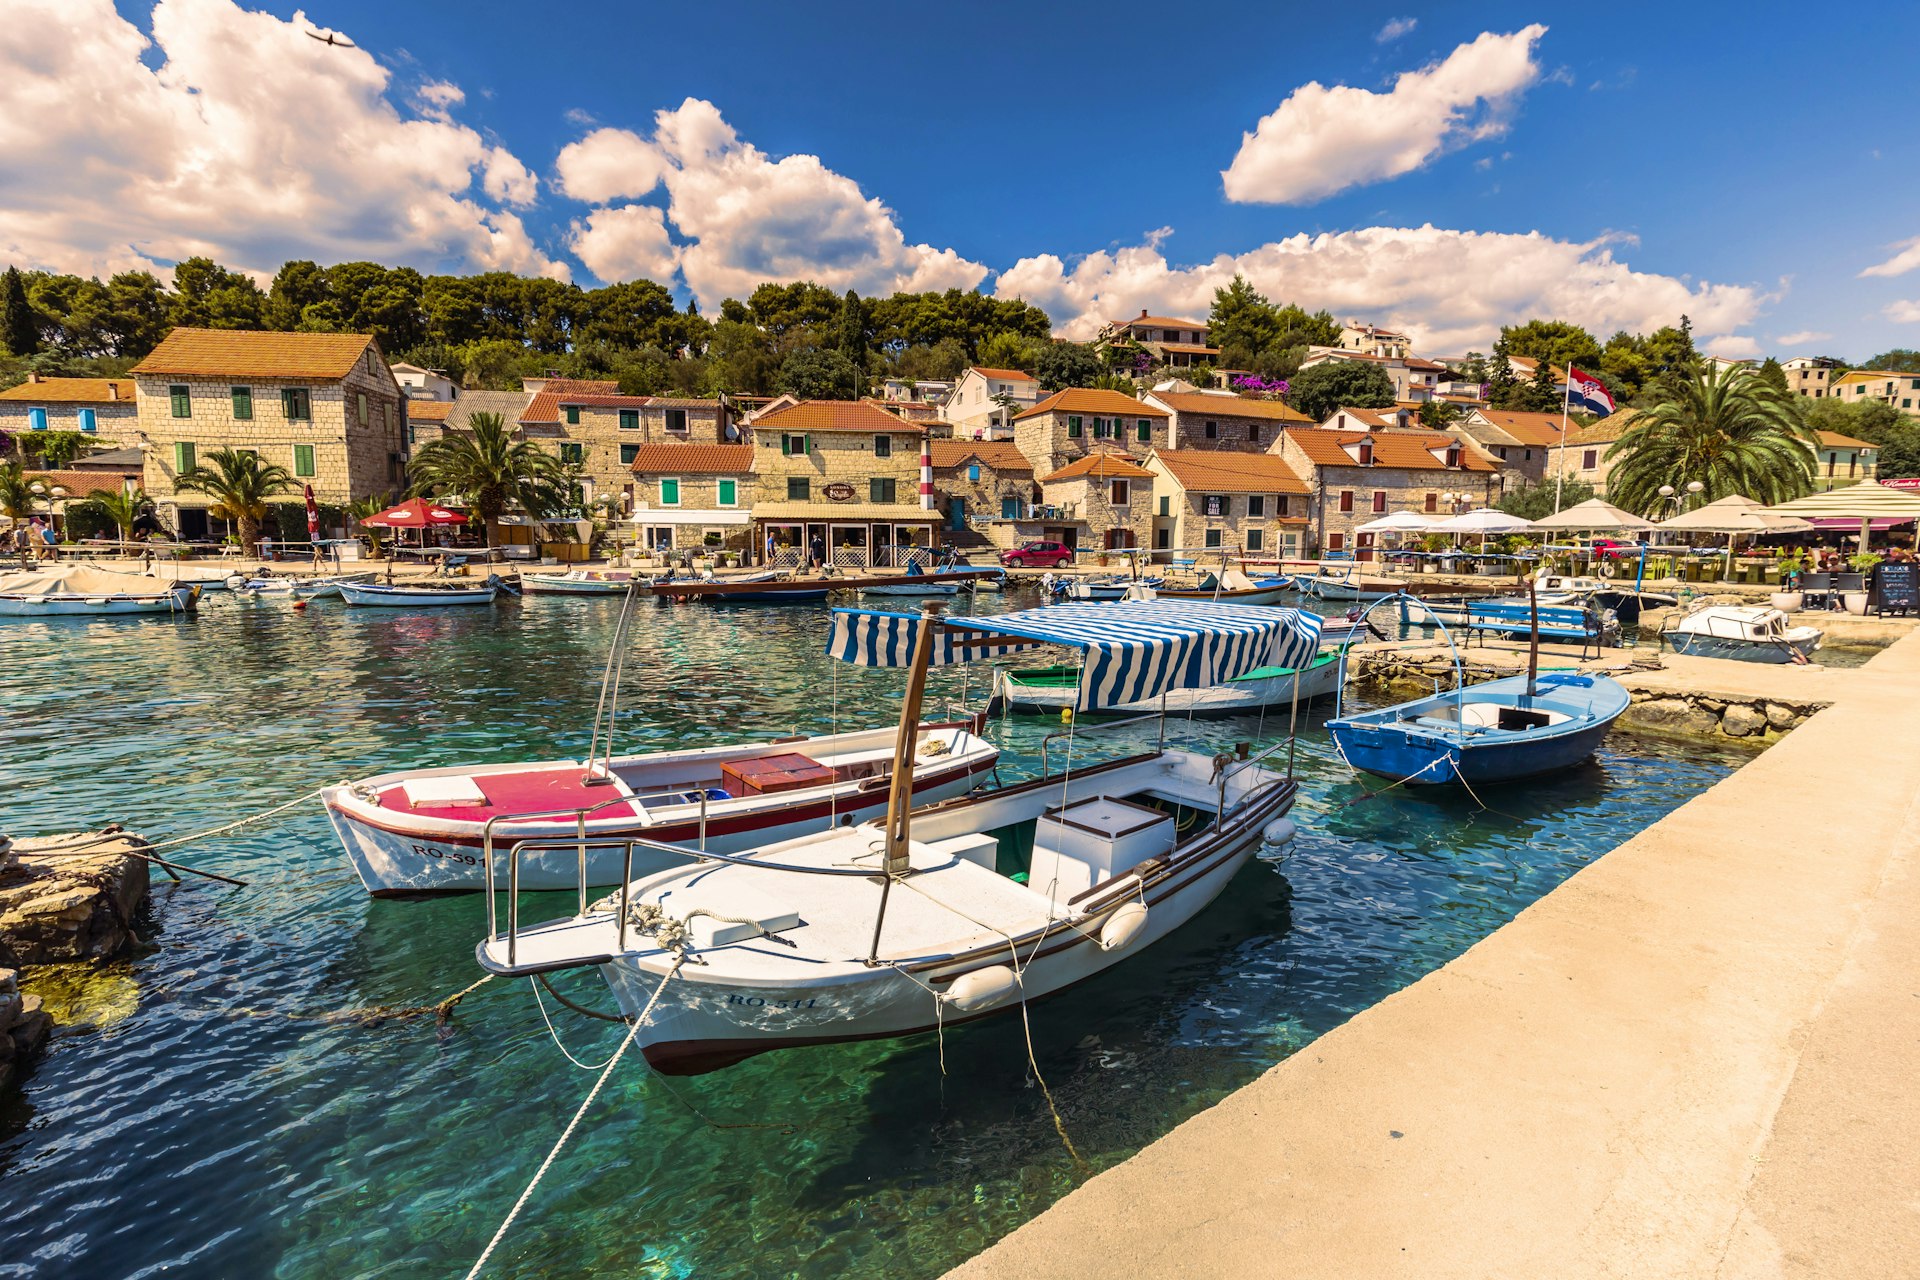 Boats in the harbor in the village of Maslinica, Croatia